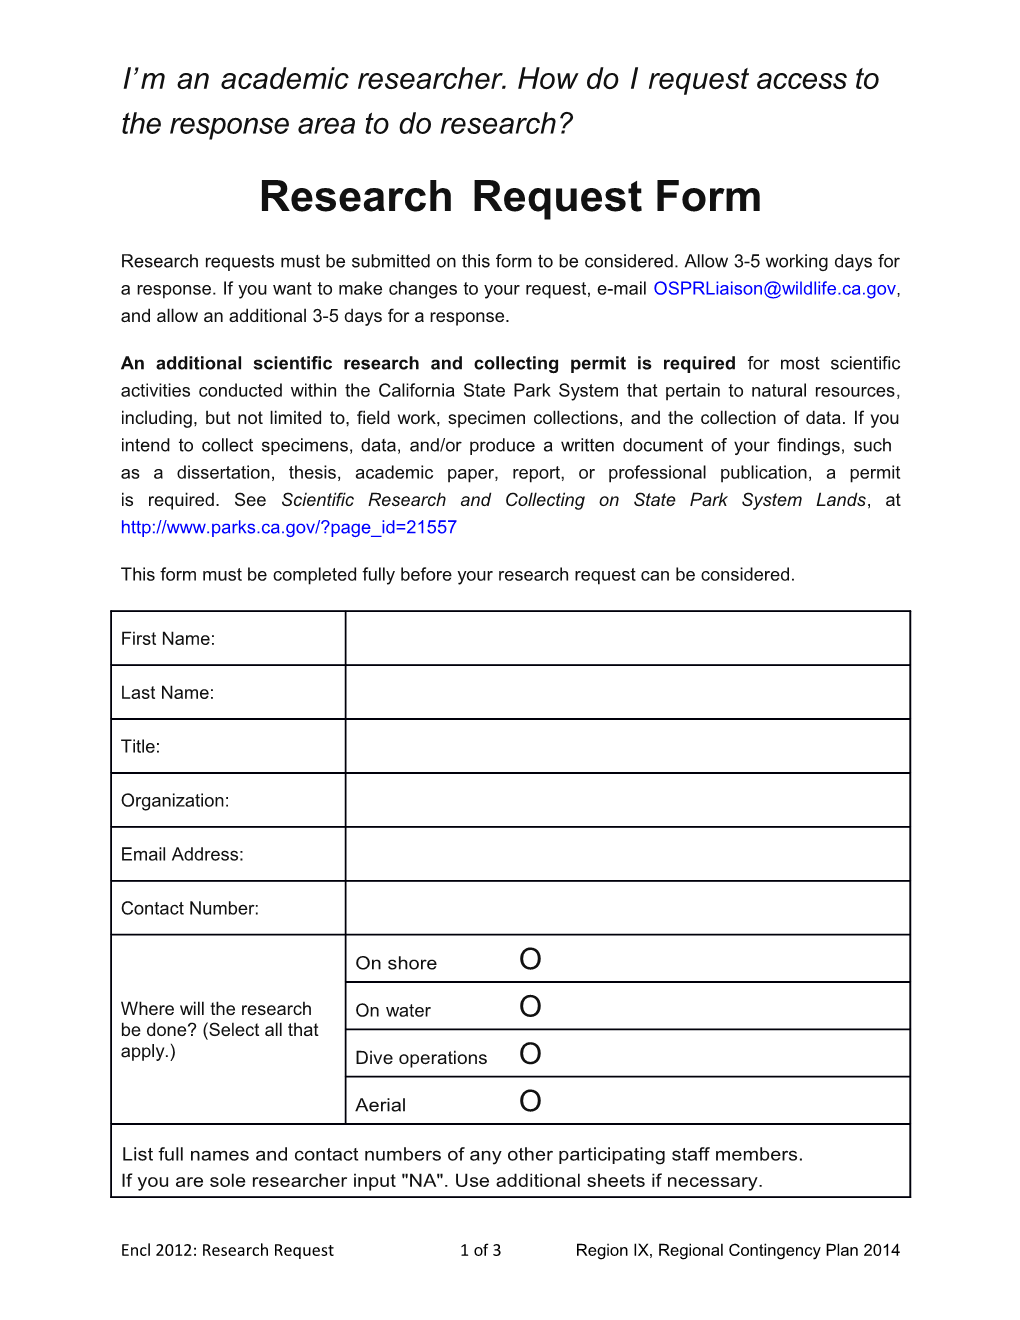 I M an Academic Researcher. How Do I Request Access to the Response Area to Do Research?